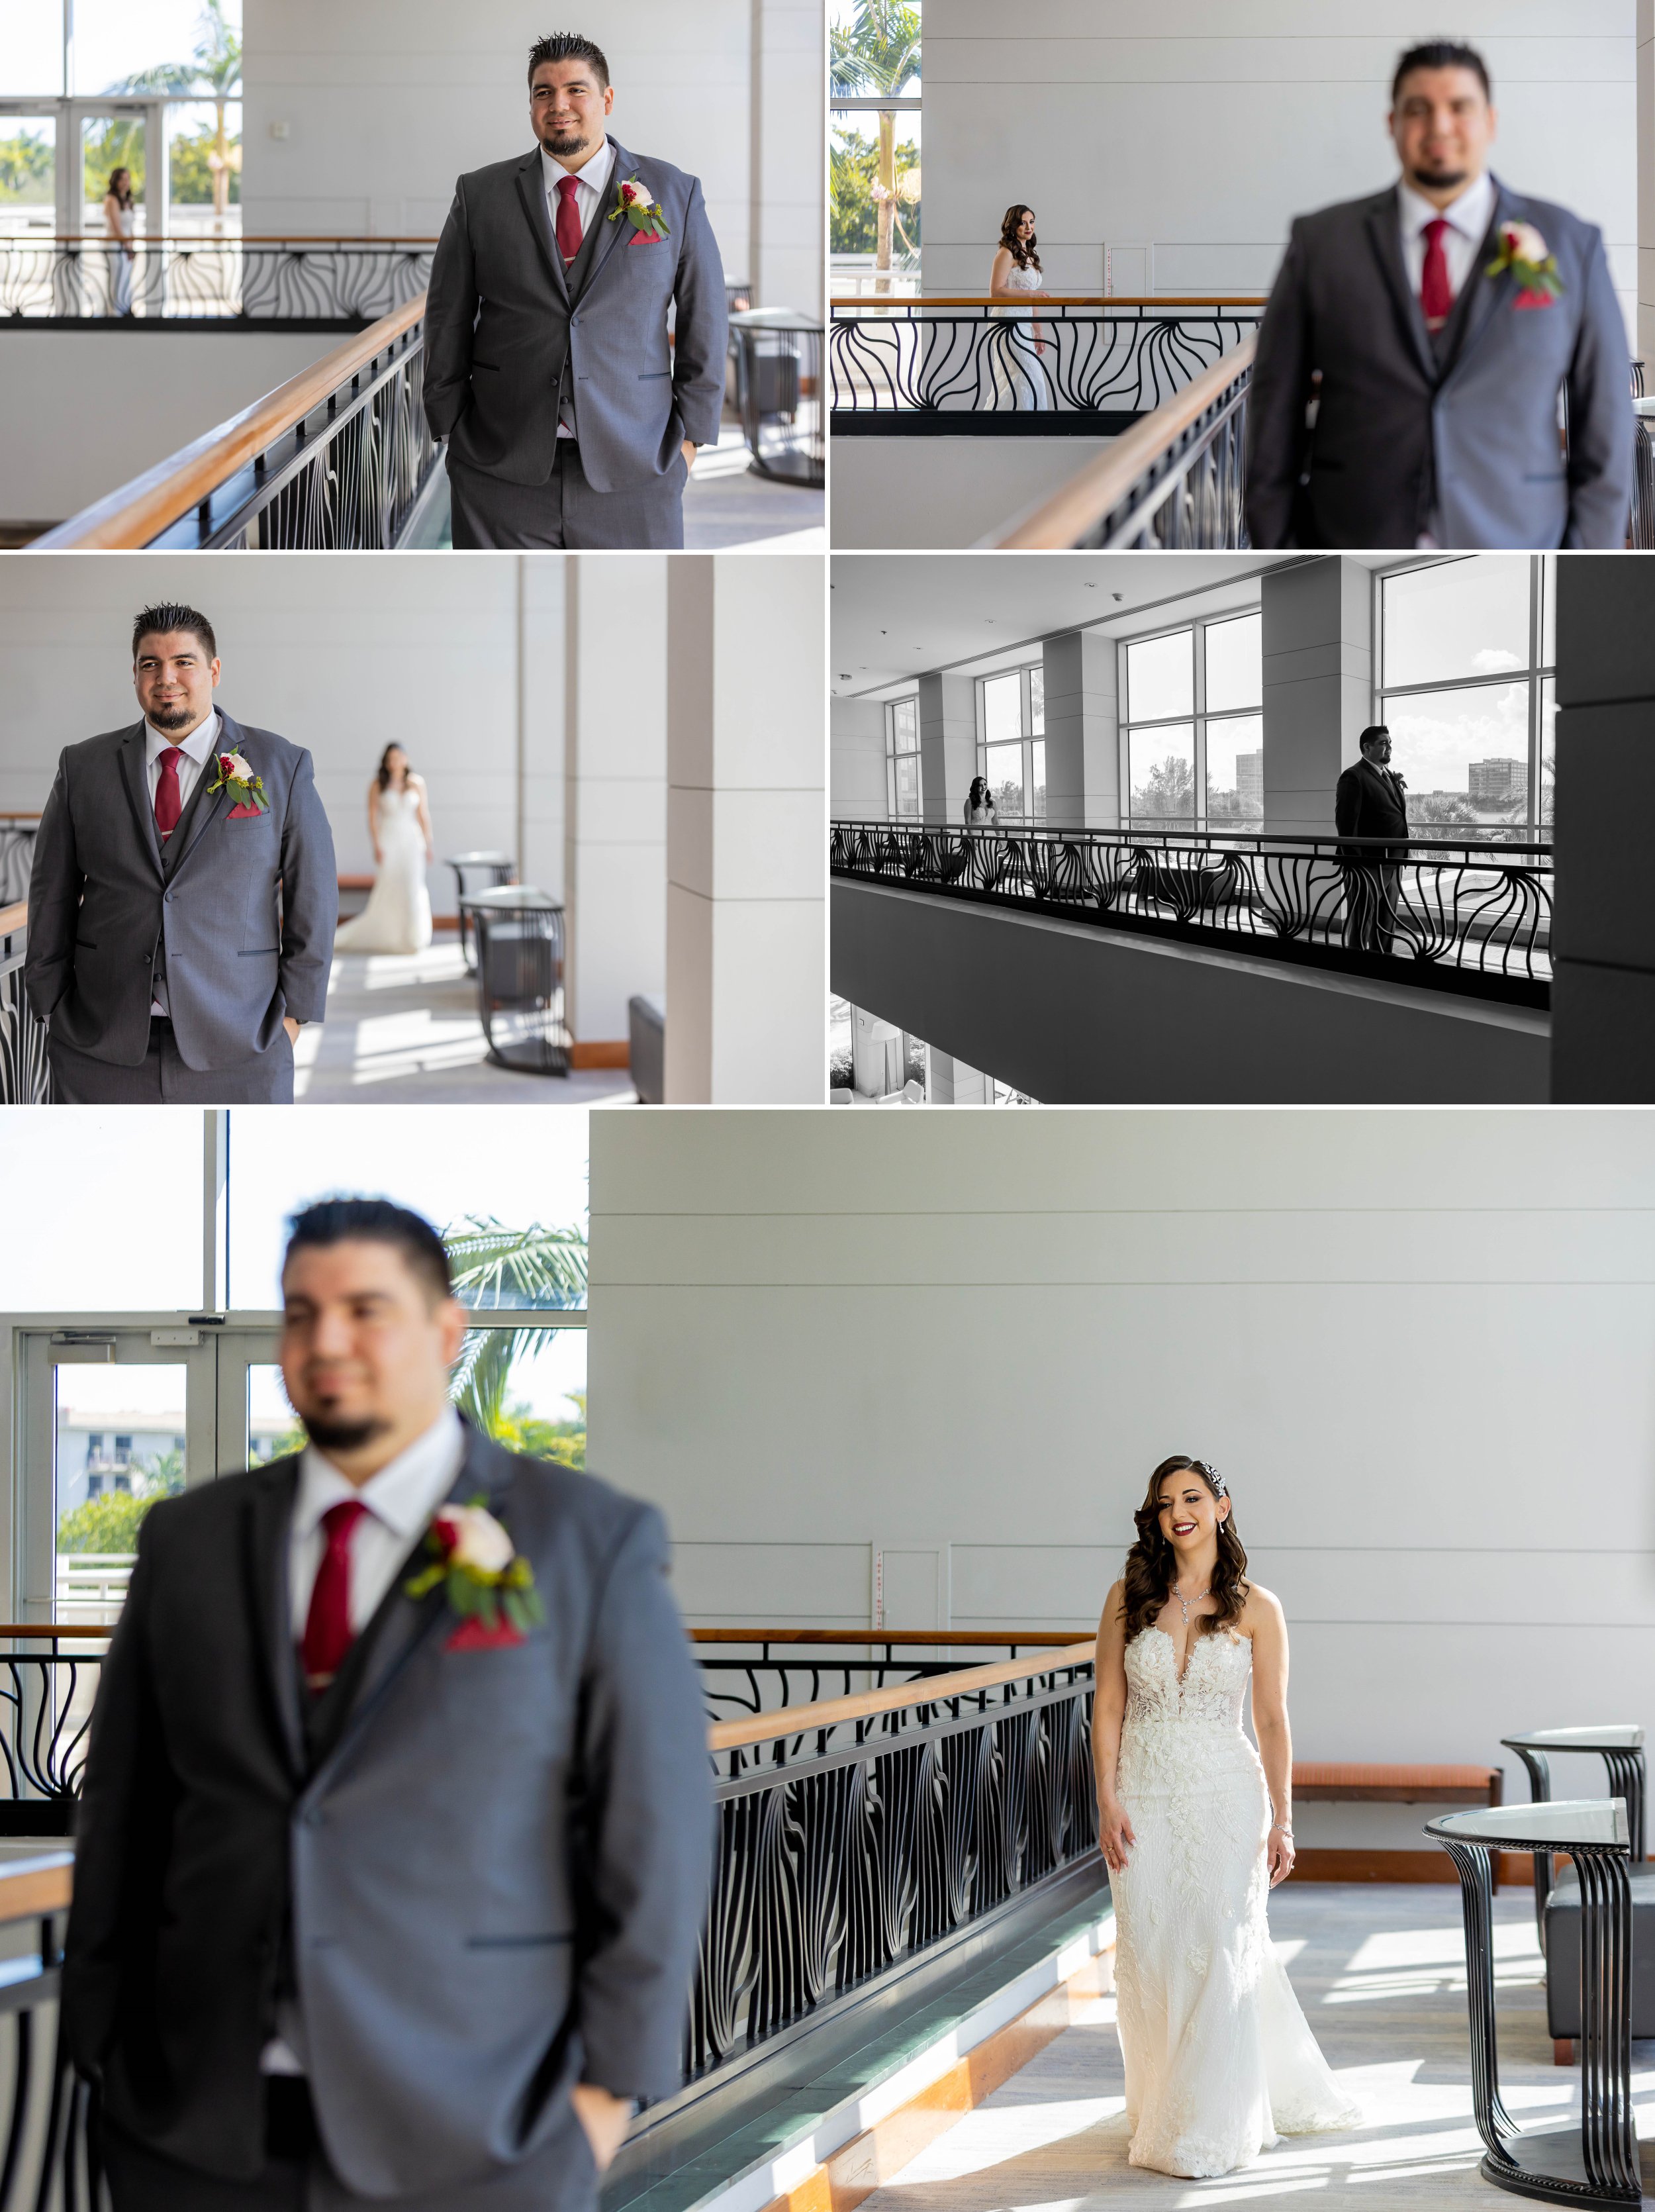 Wedding FIRST UNITED METHODIST CHURCH OF CORAL GABLES - Photography by Santy Martinez 15.jpg